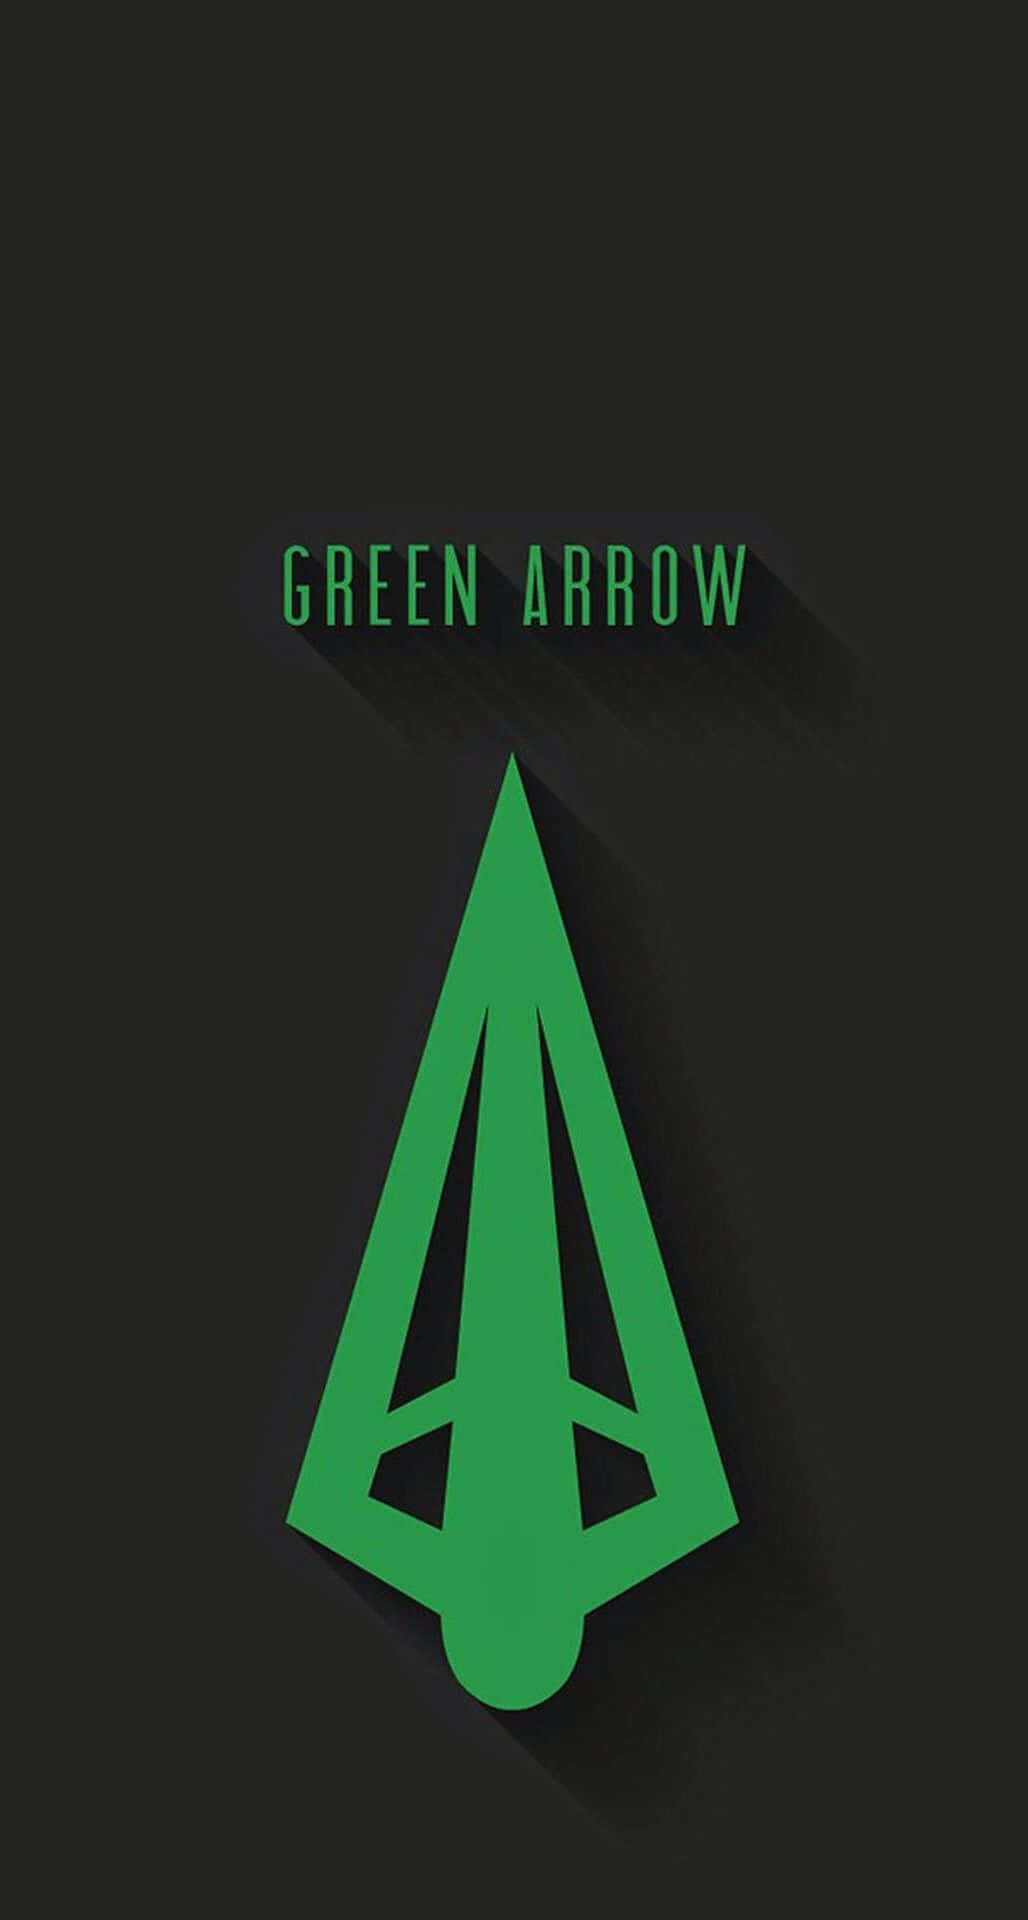 Show Off Your Style With The New Stunning Green Arrow Iphone Wallpaper